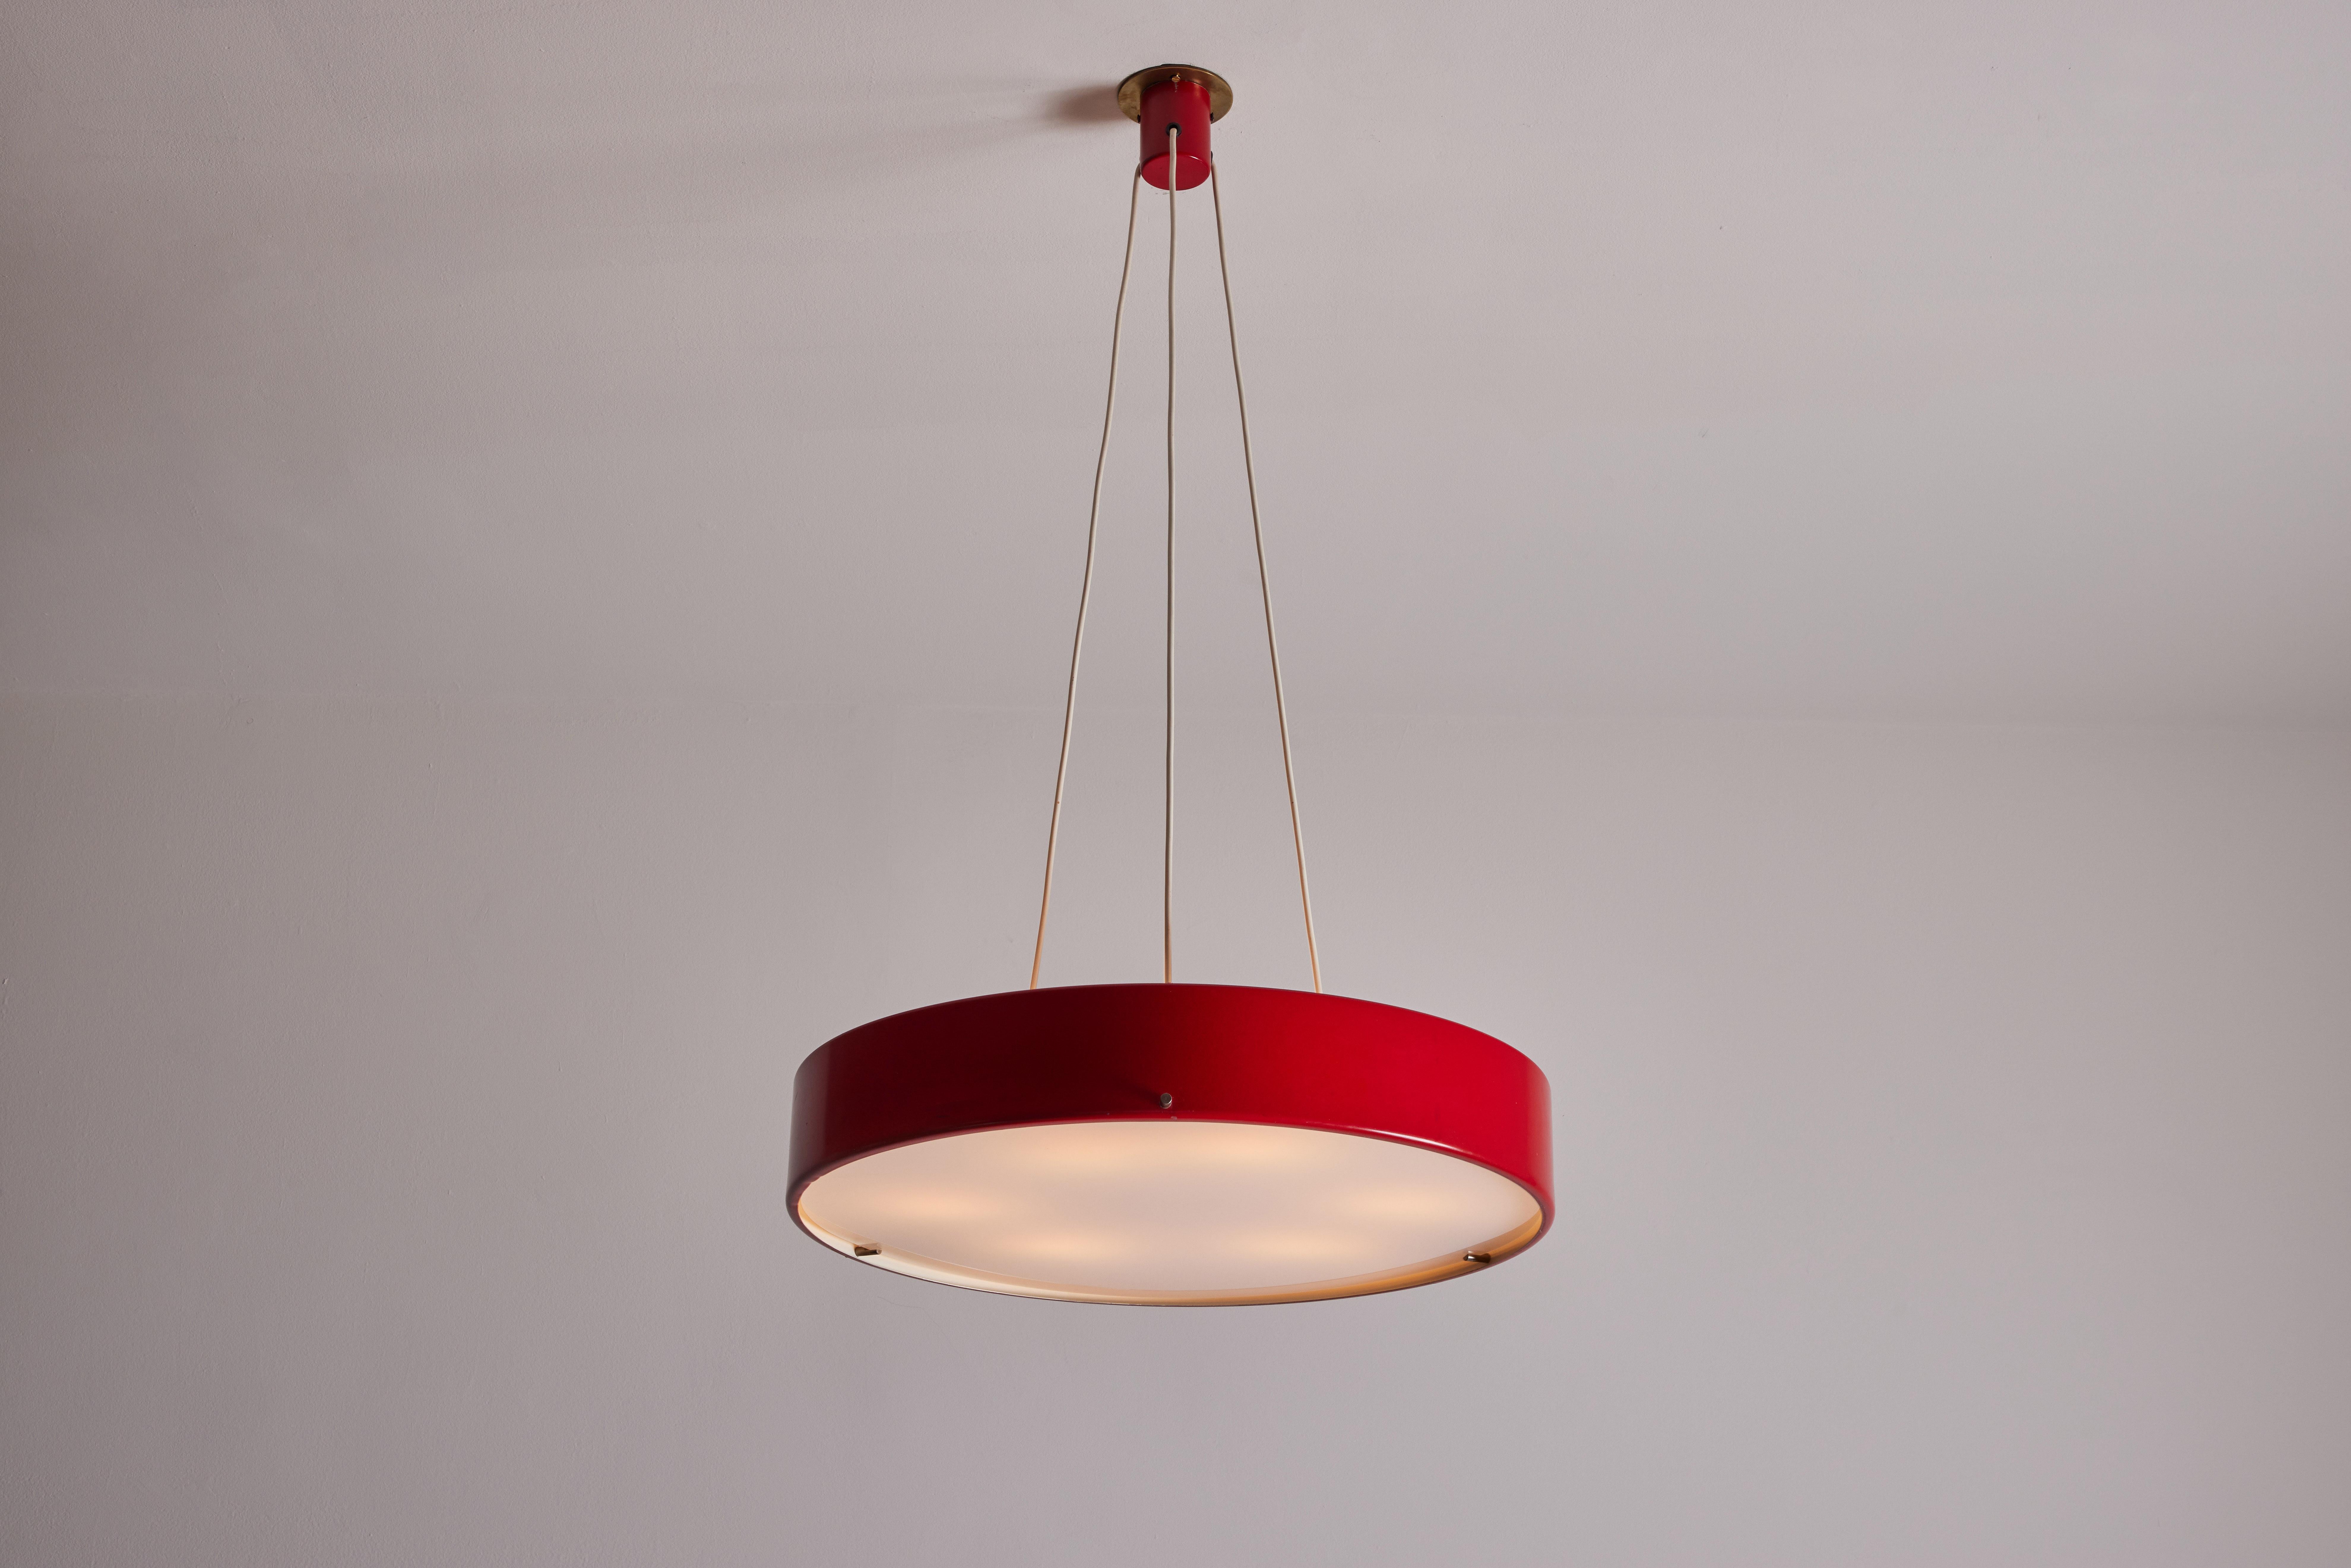 Suspension light by Bruno Gatta for Stilnovo. Designed and manufactured in Italy, circa 1950's. Painted metal, acrylic, brass. Original canopy, custom brass backplate. Rewired for U.S. standards. We recommend six E27 25w maximum bulbs. Bulbs